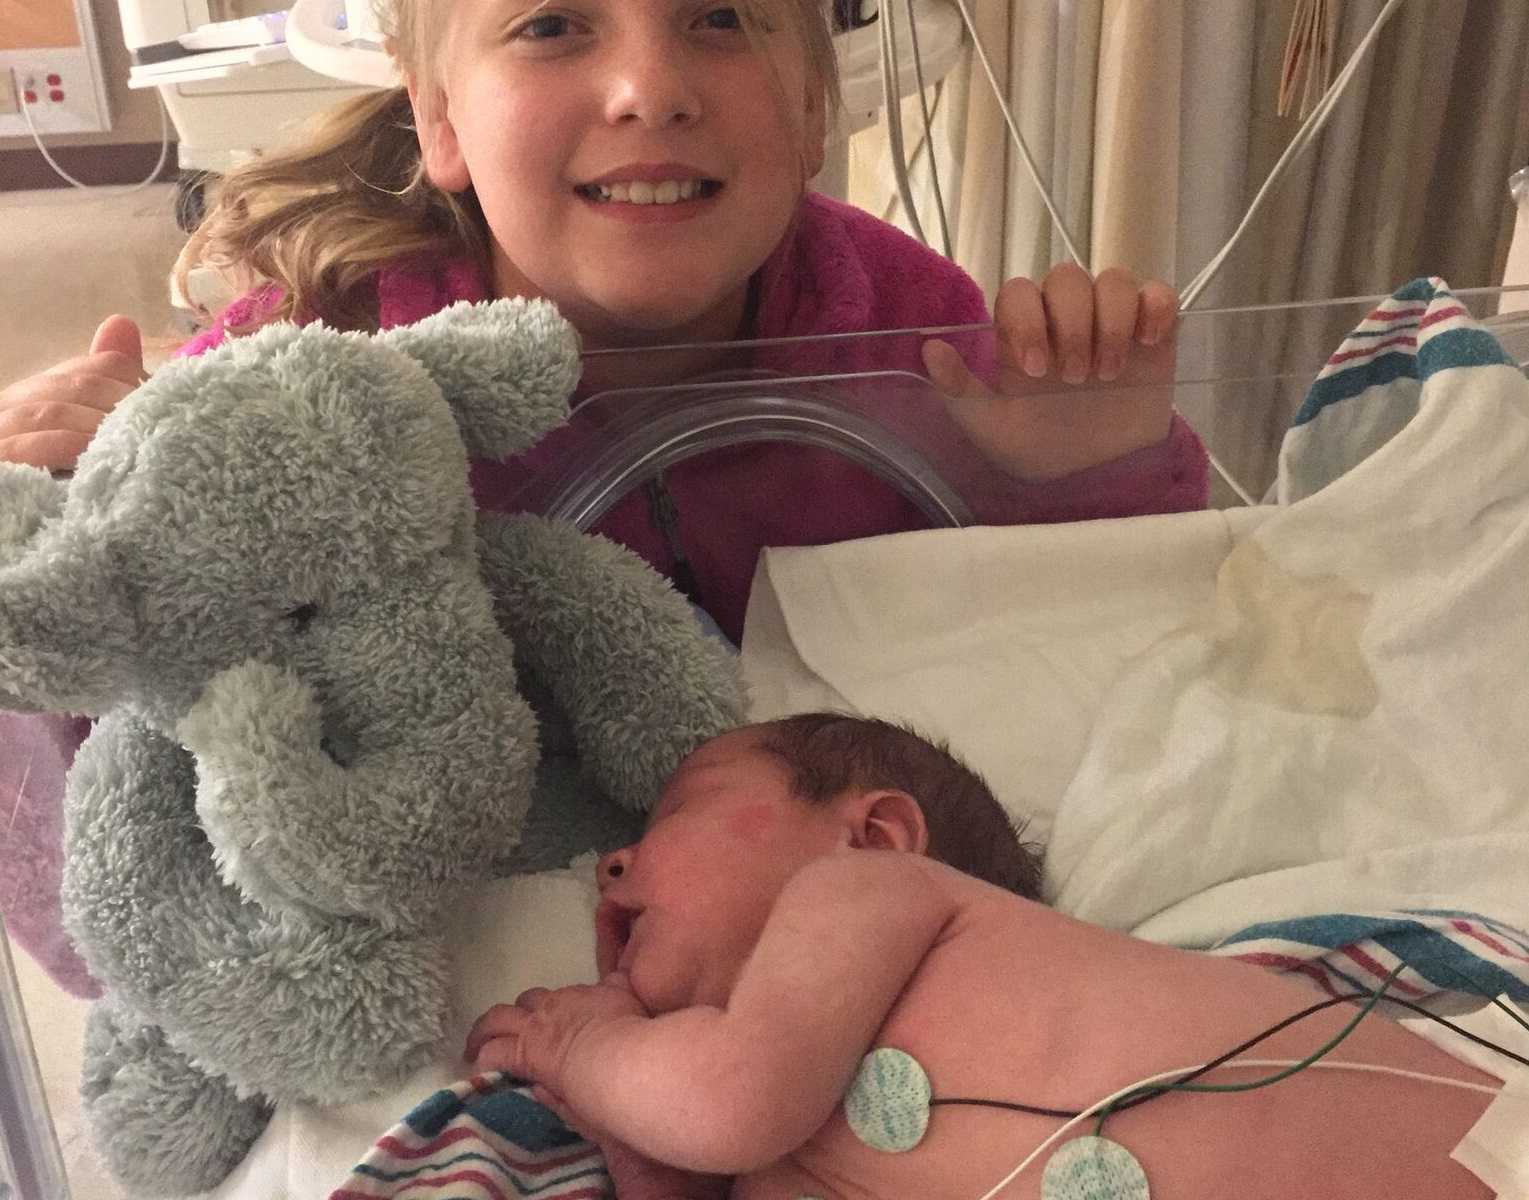 older sister leaning next to adopted brother sleeping at hospital with an elephant stuffed animal